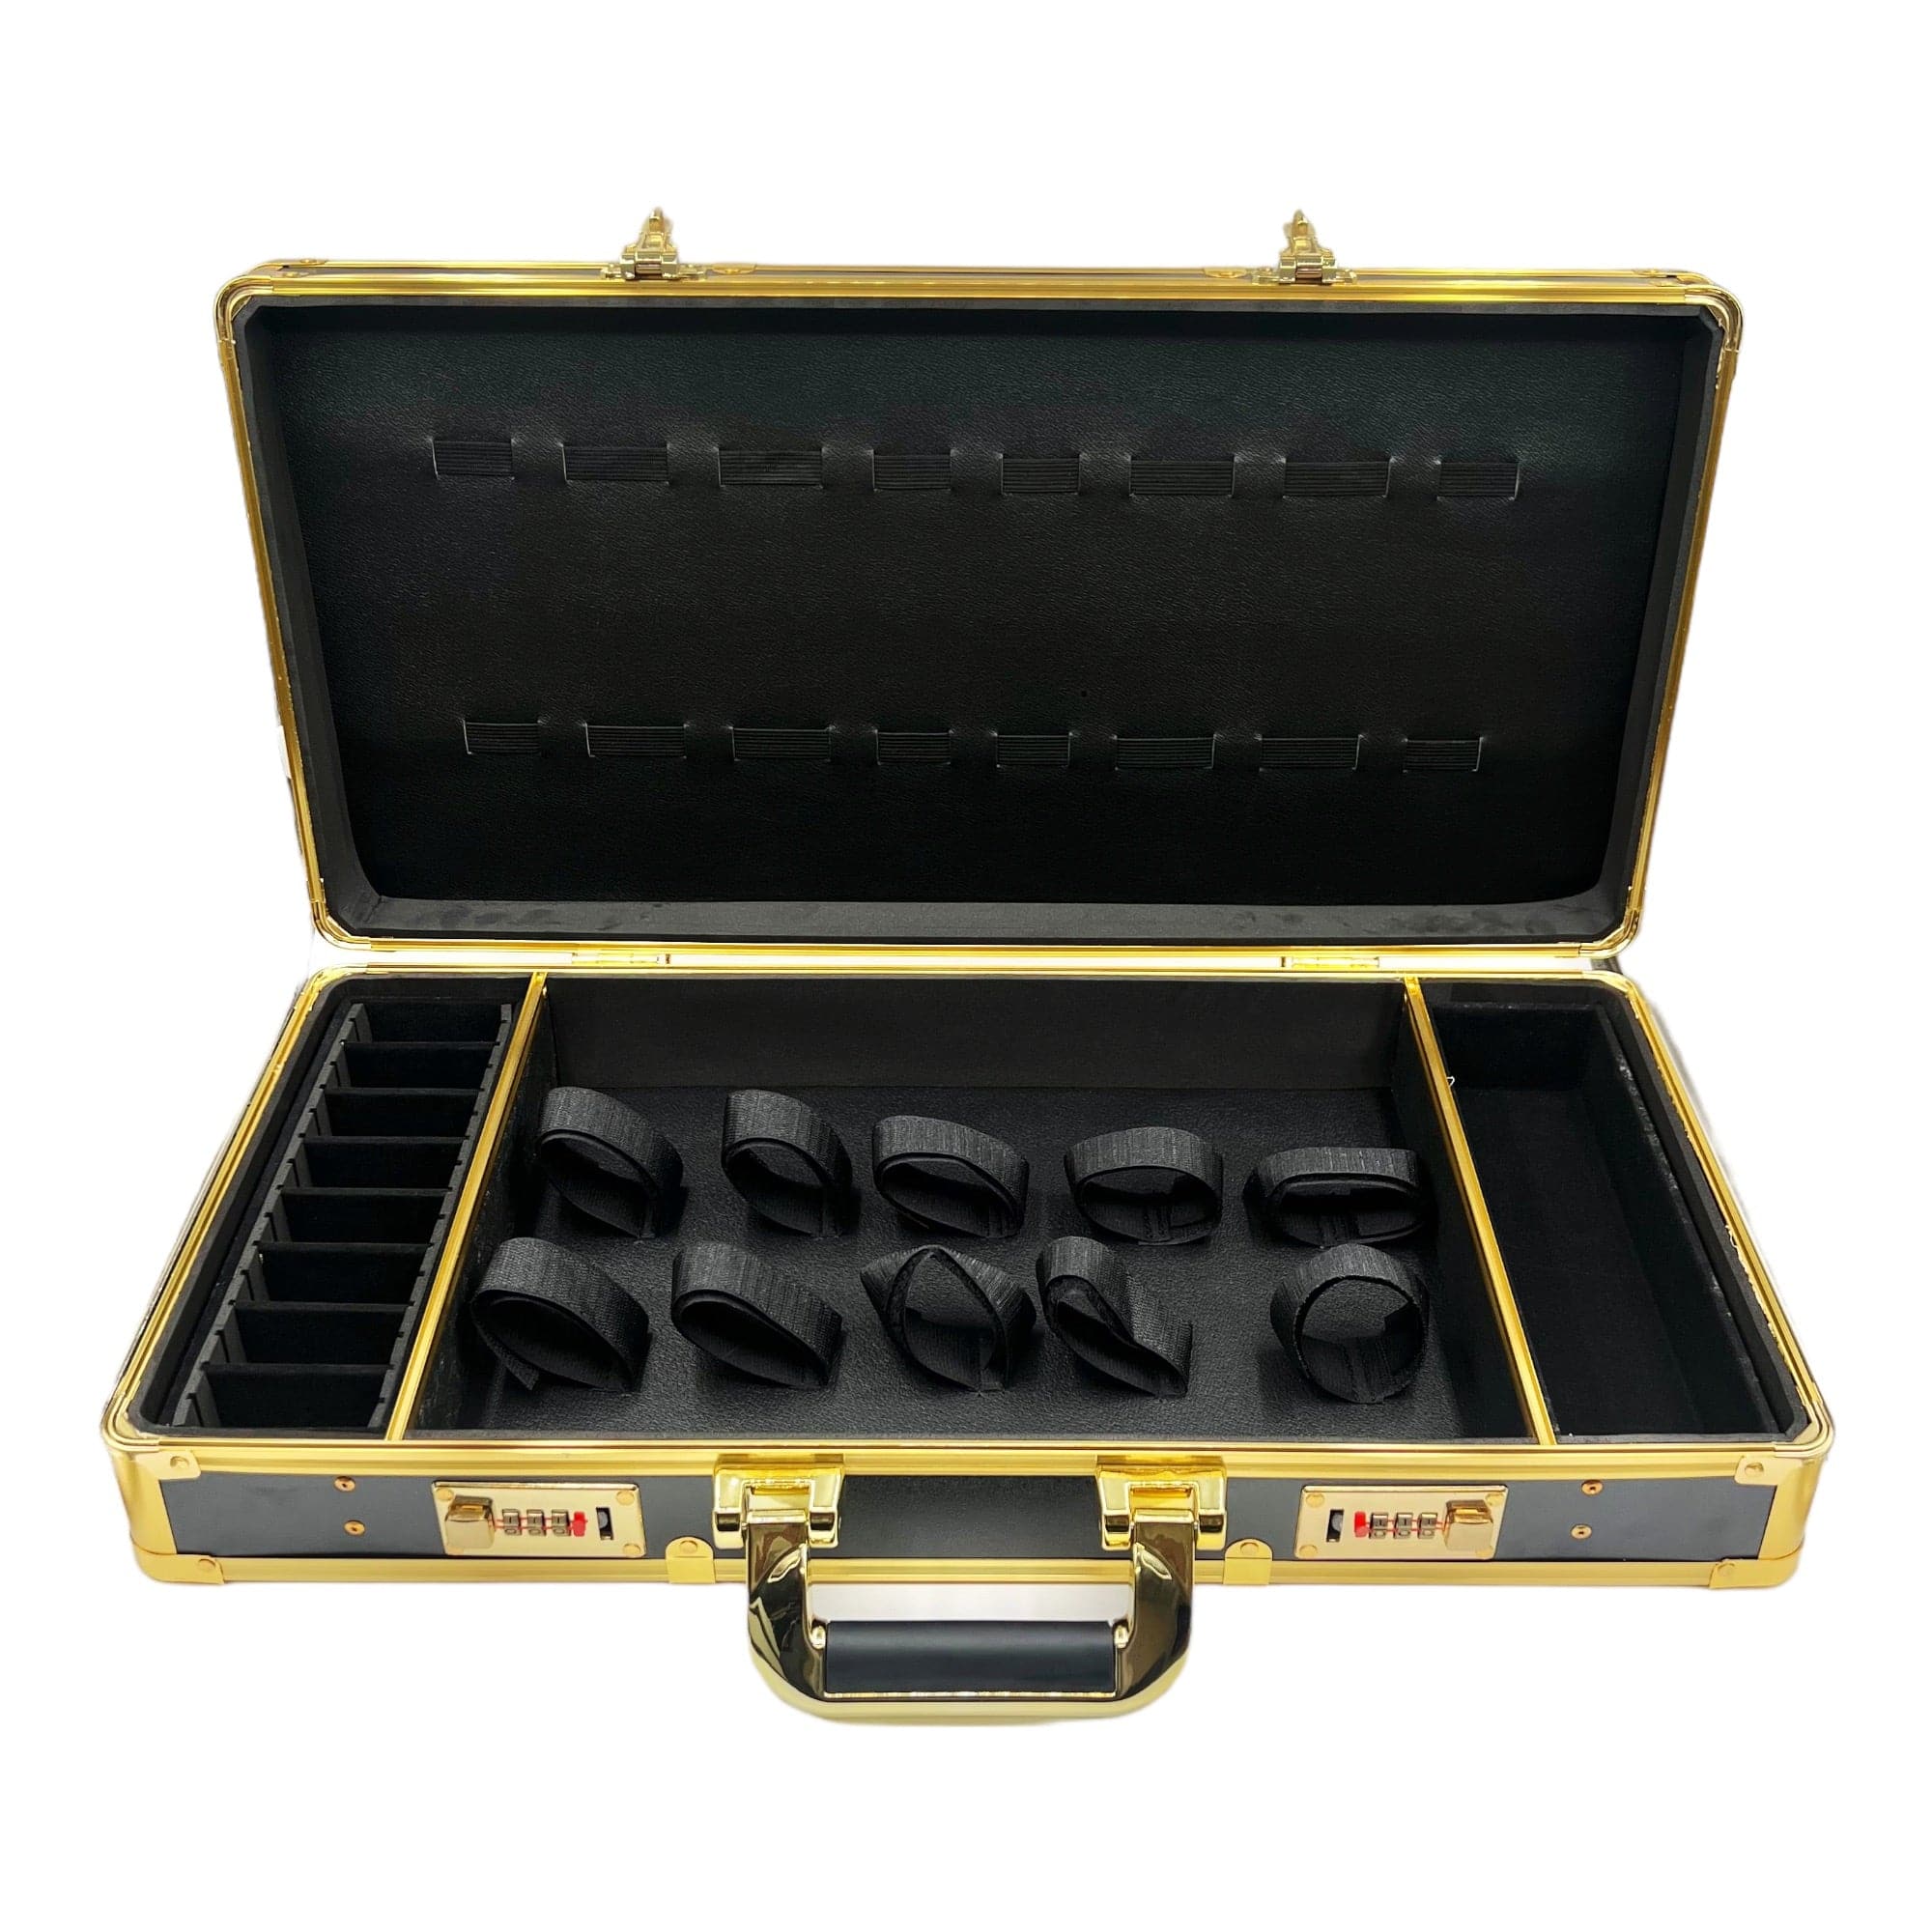 Eson - Barber Tools Carry Case Gold Aluminum Frame With Lock